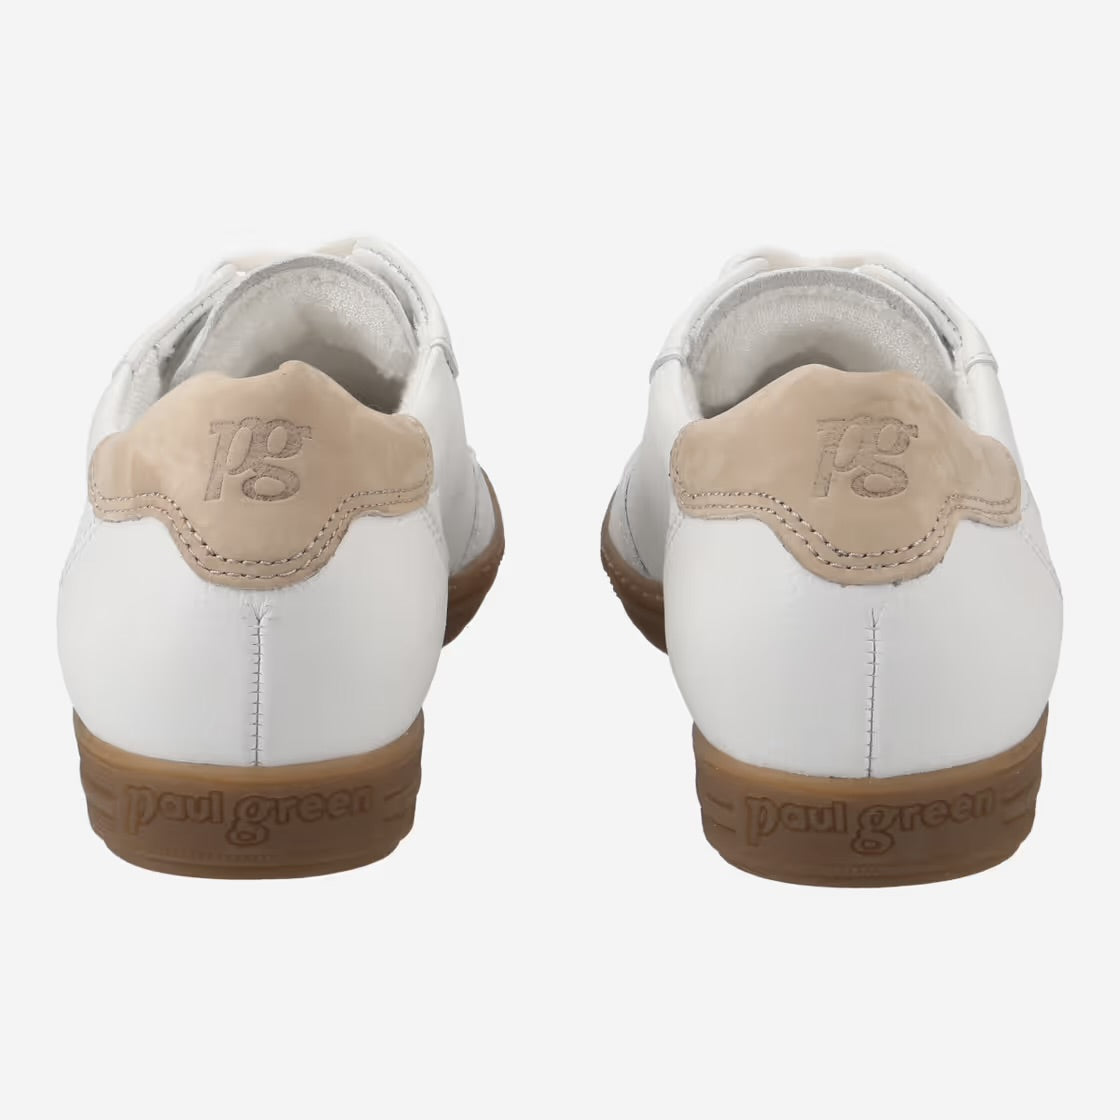 Paul Green - 5350 White and Beige Trainer [Standard Fit]